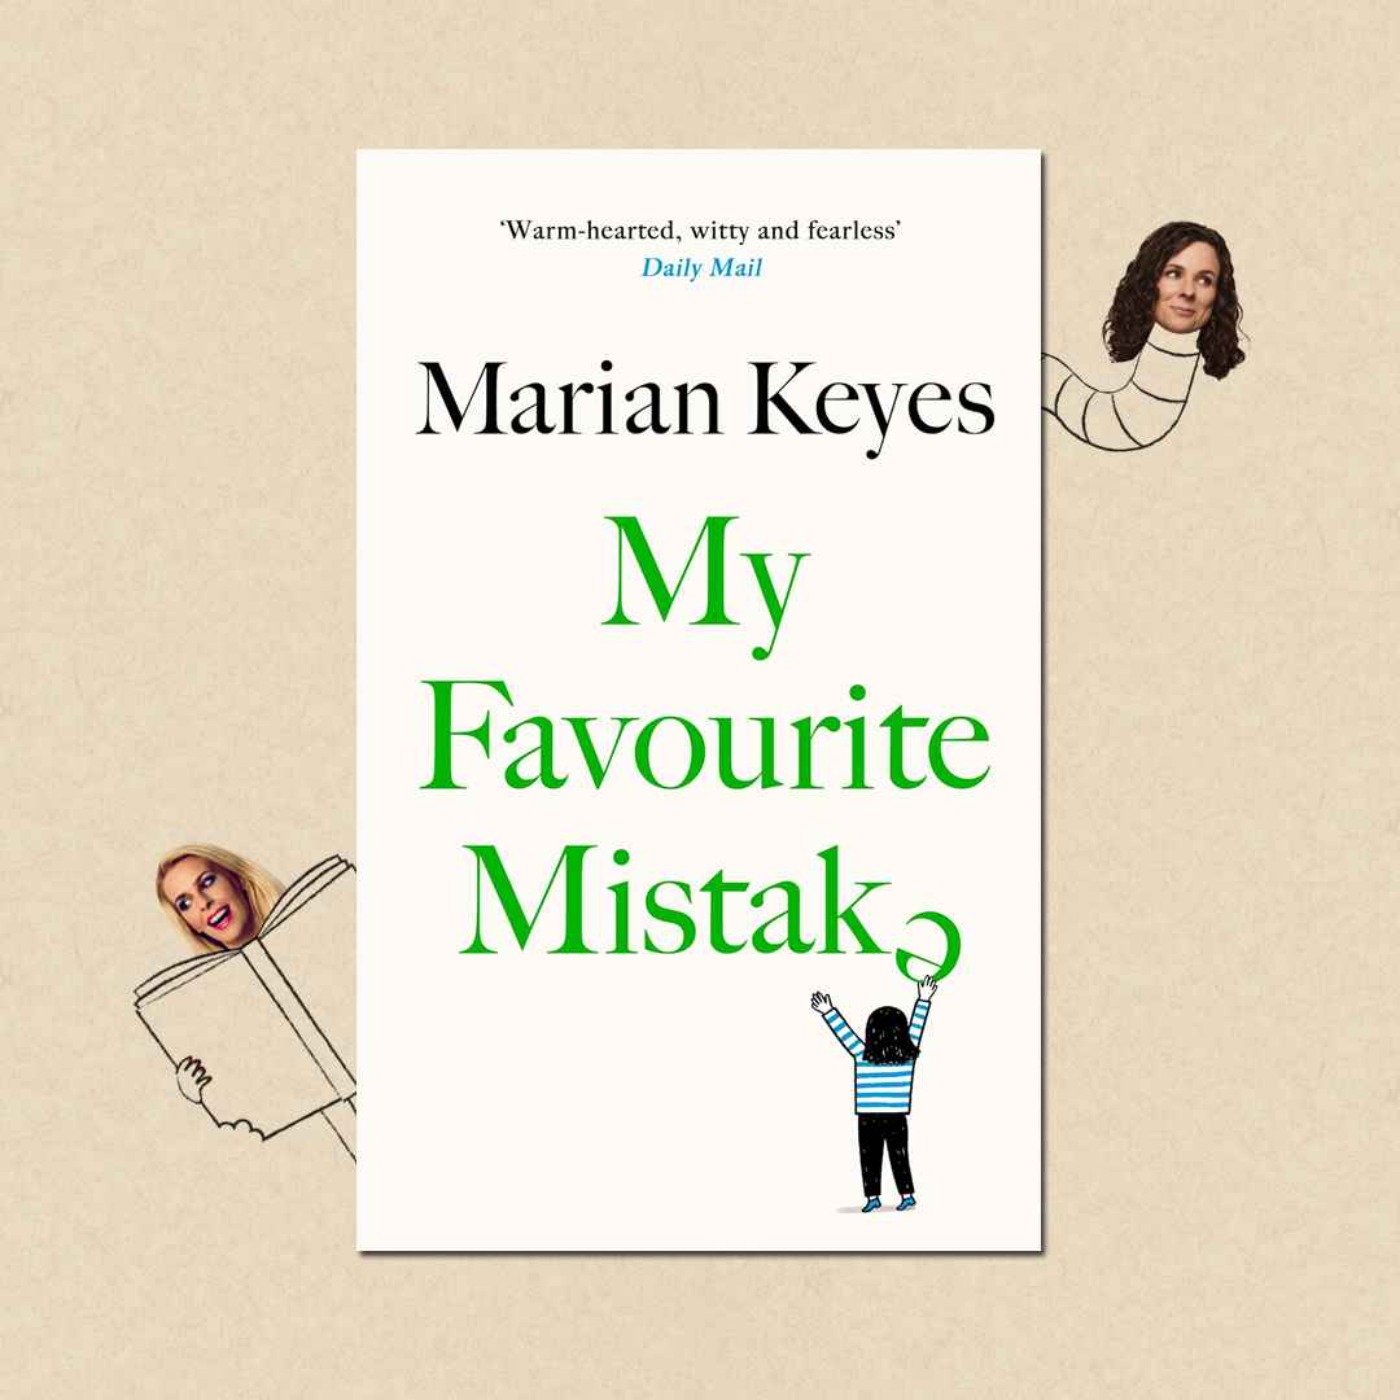 My Favourite Mistake by Marian Keyes with Marian Keyes